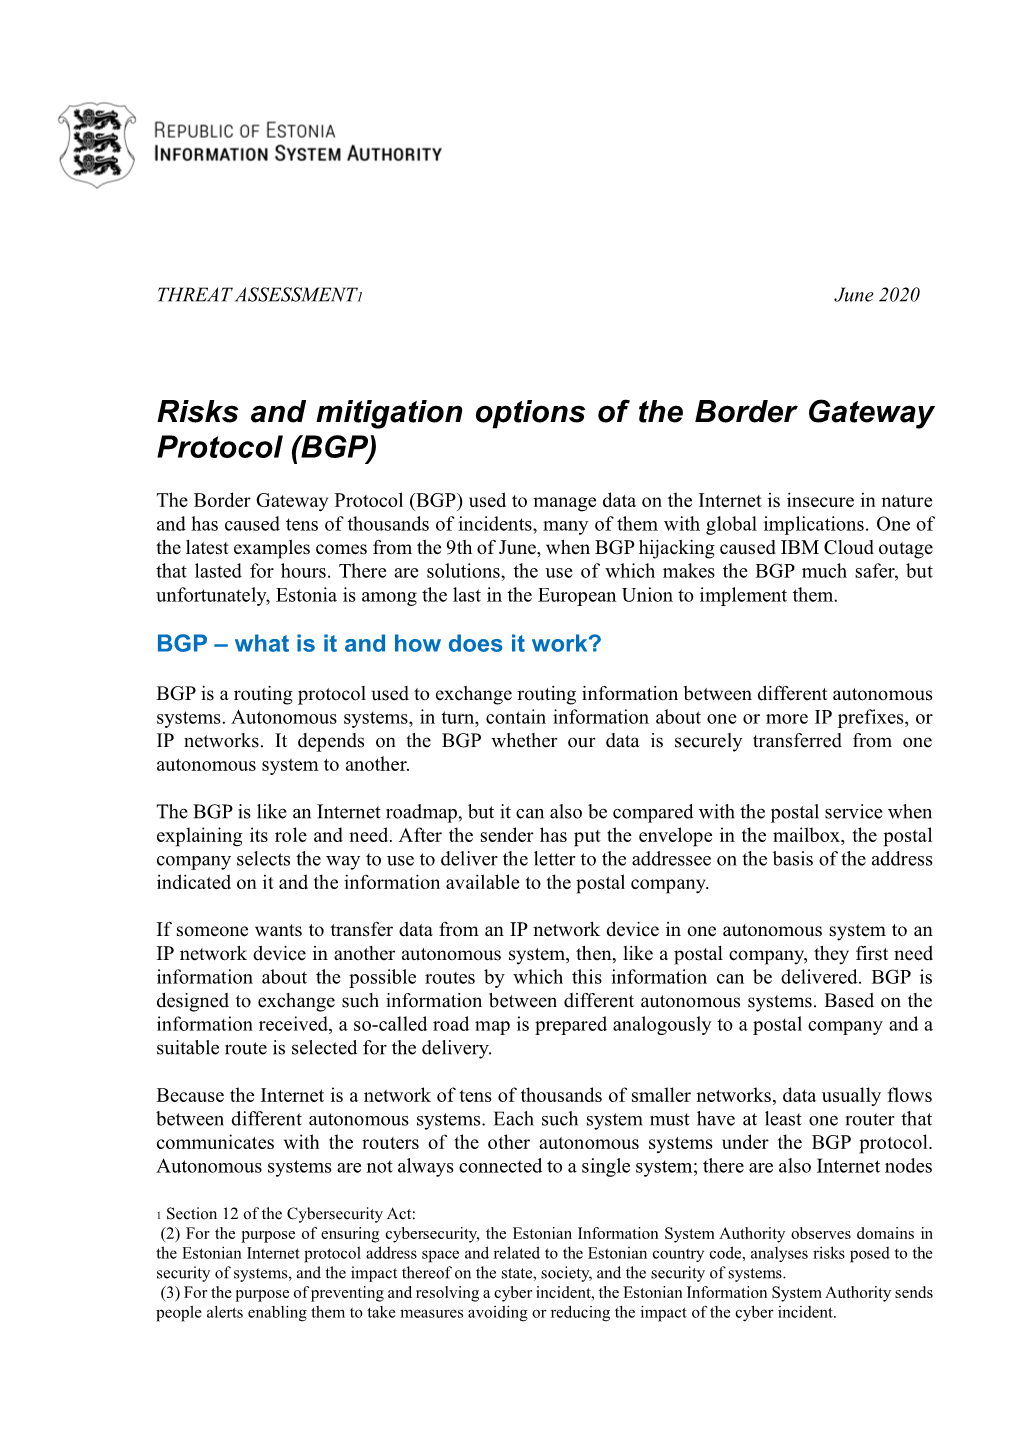 Risks and Mitigation Options of the Border Gateway Protocol (BGP)